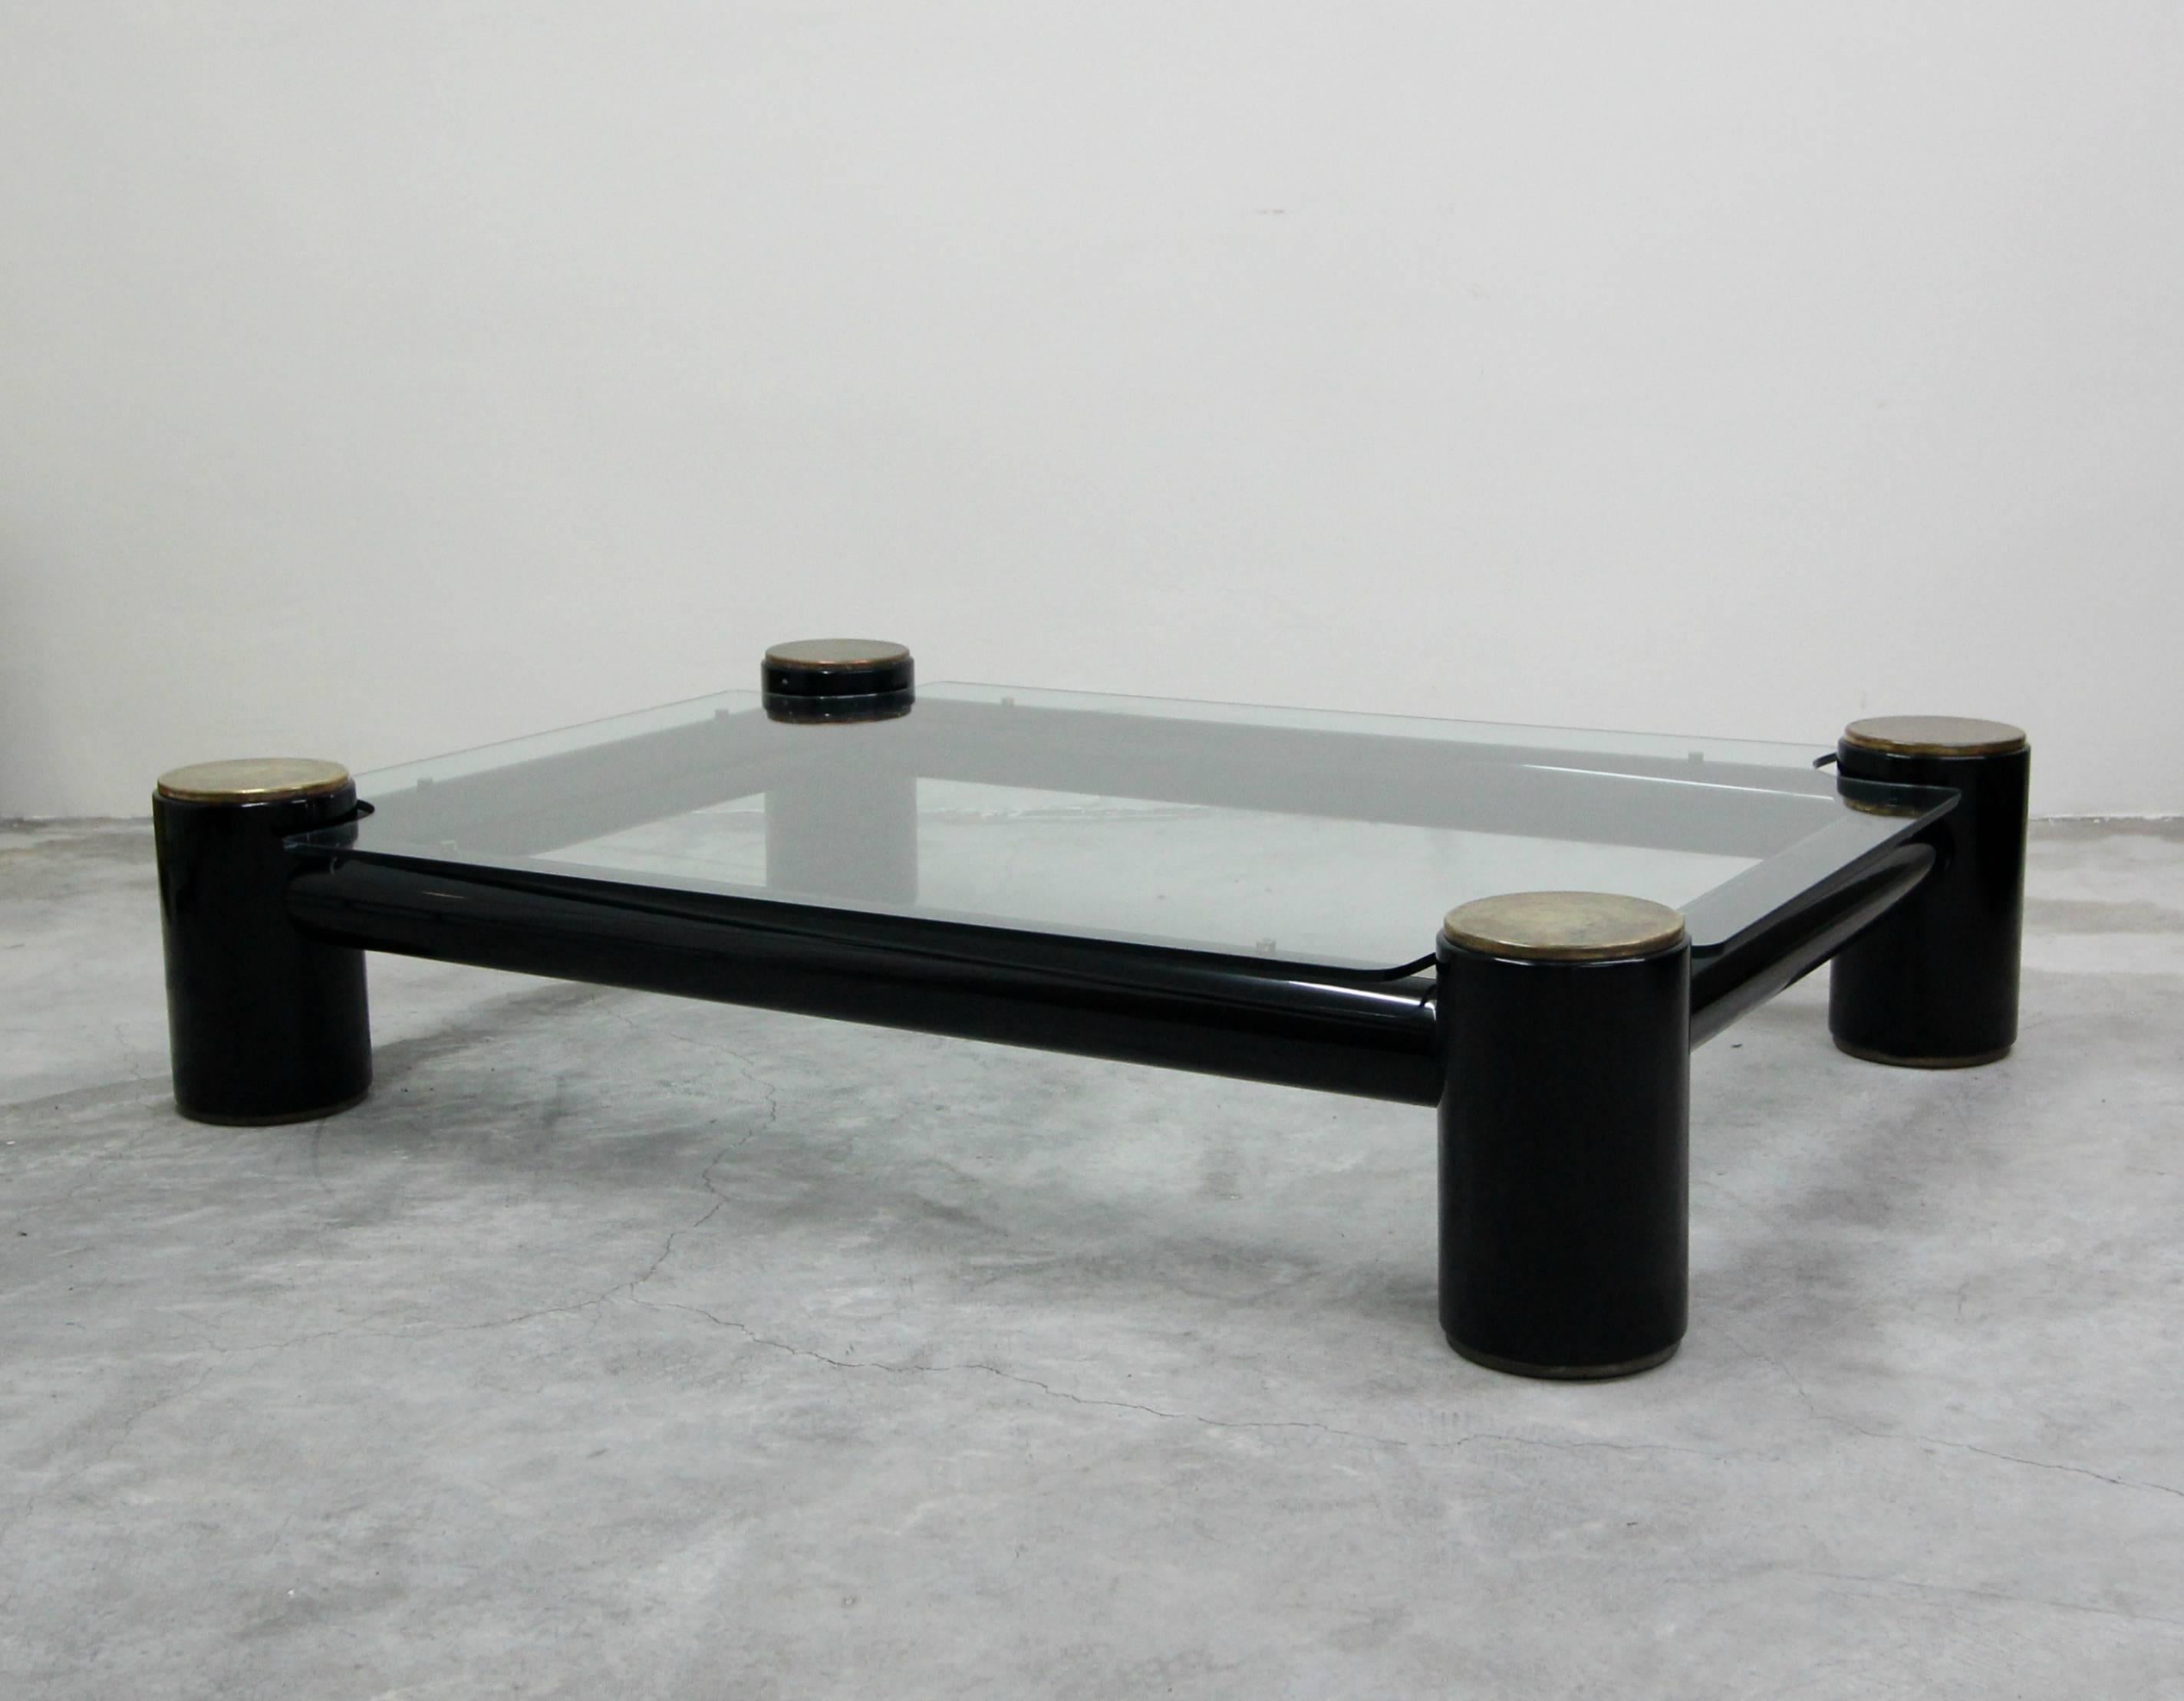 Monumental Postmodern acrylic tube brass and glass coffee table, most likely custom. Constructed of large black acrylic pipe like tubing with eye catching brass caps and feet and a beautiful puzzled piece of glass. If you are in need of a huge table